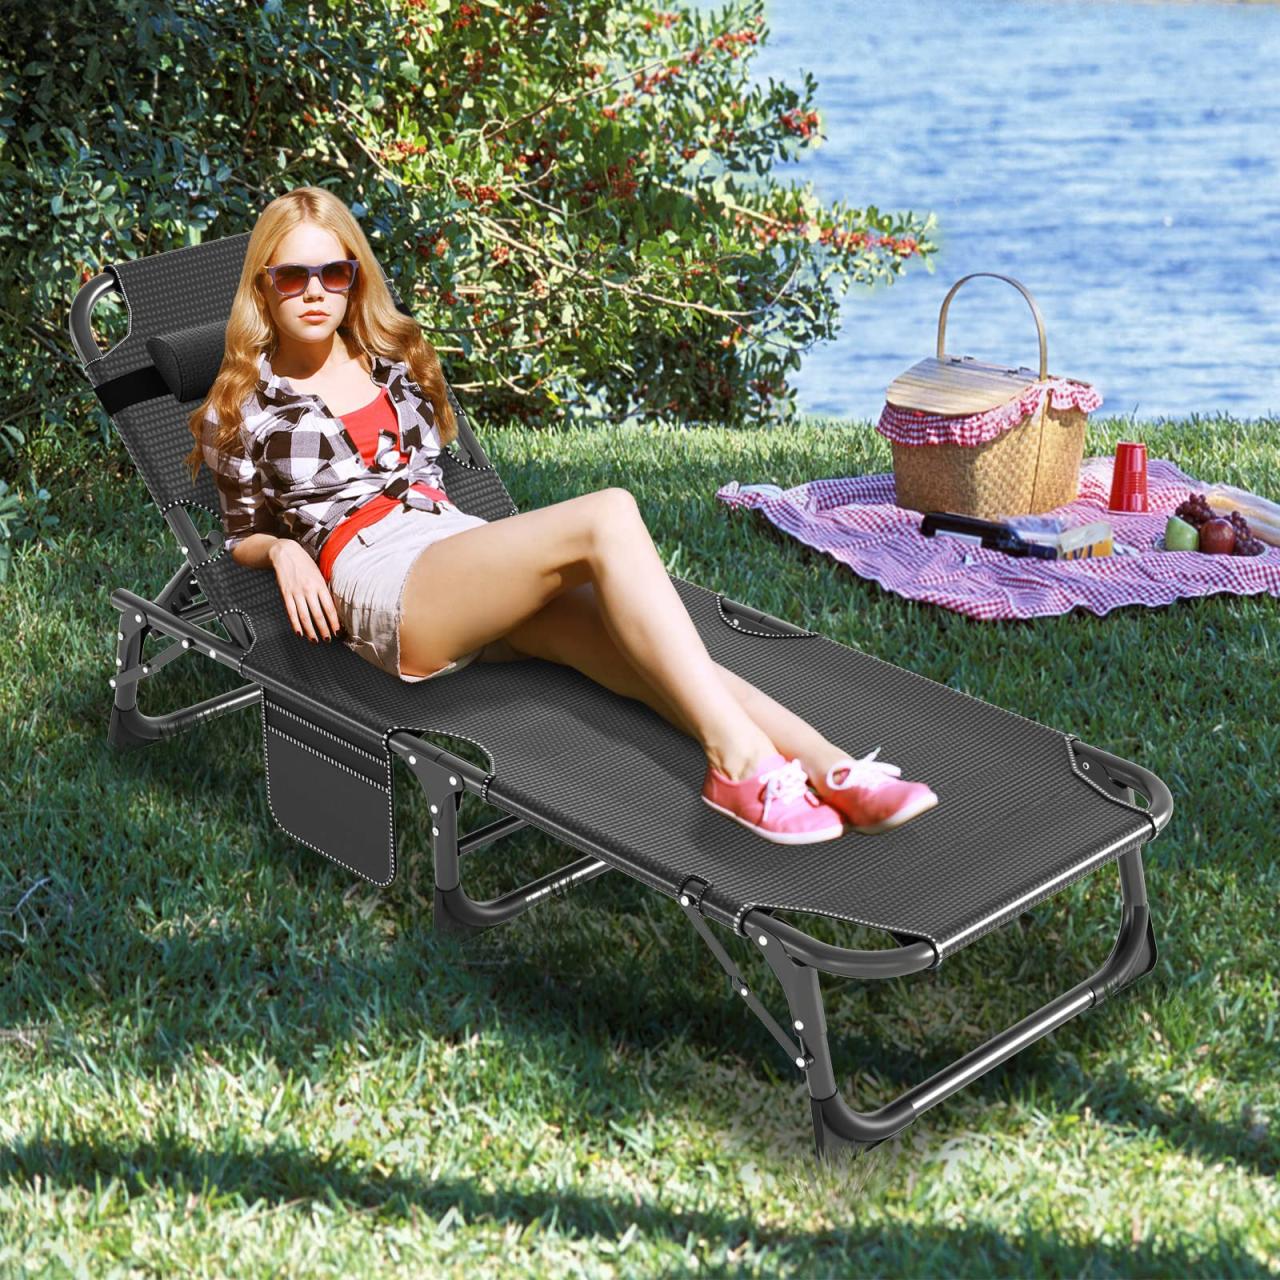 Amazon.com: LILYPELLE Folding Outside Chaise Lounge Chair with Mattress, 5 Position Adjustable Patio Folding Lounge Chair Reclining Chairs Perfect for Outside, Sunbathing, Camping, Pool, Beach, Patio : Patio, Lawn & Garden